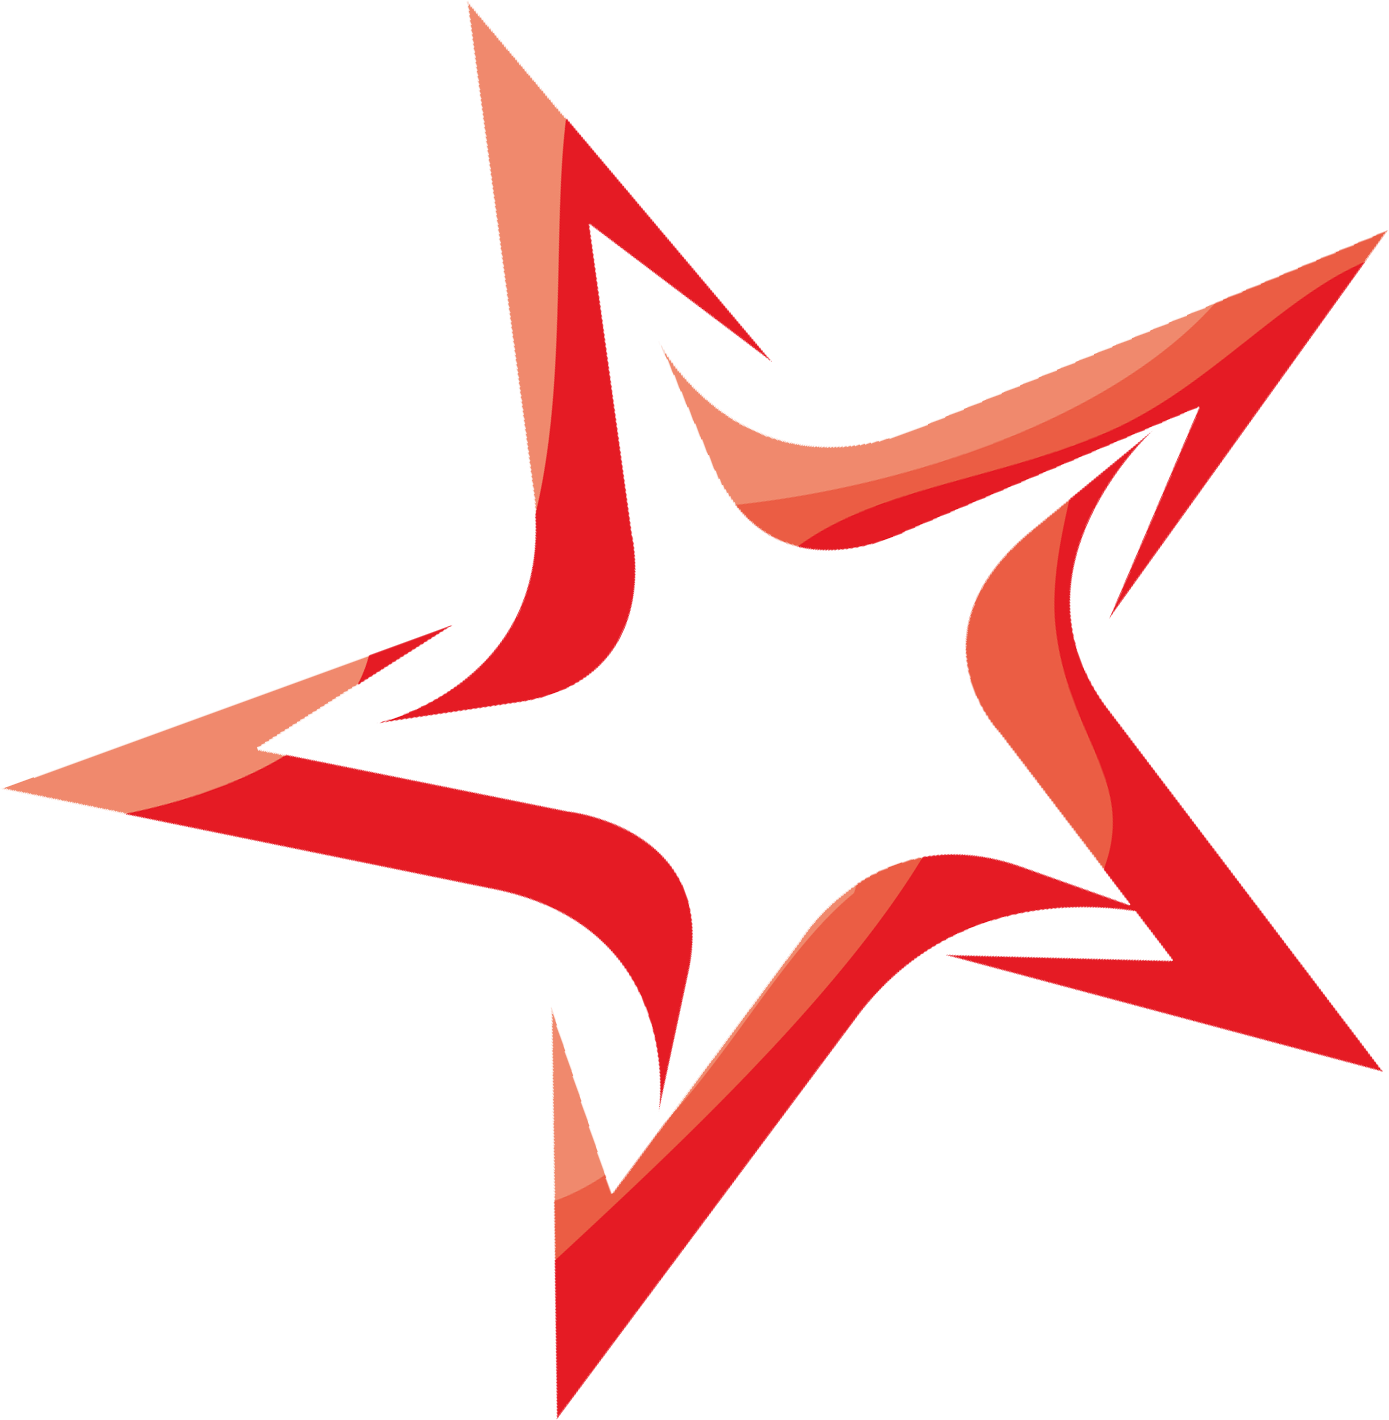 Star PNG Clipart